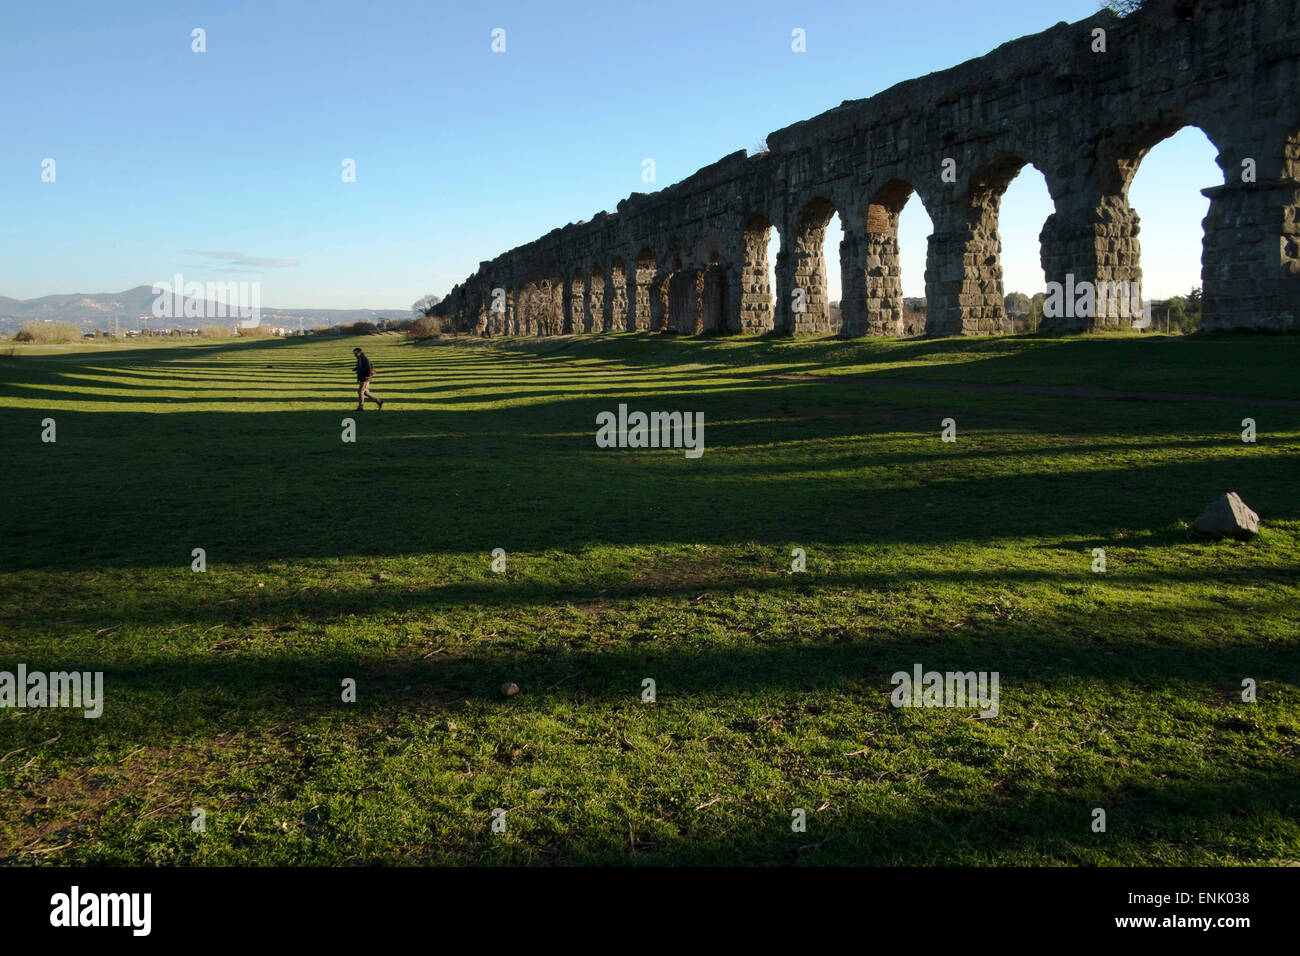 One of the largest Aqueducts in Rome built in the year 38 BC, Rome, Lazio, Italy, Europe Stock Photo